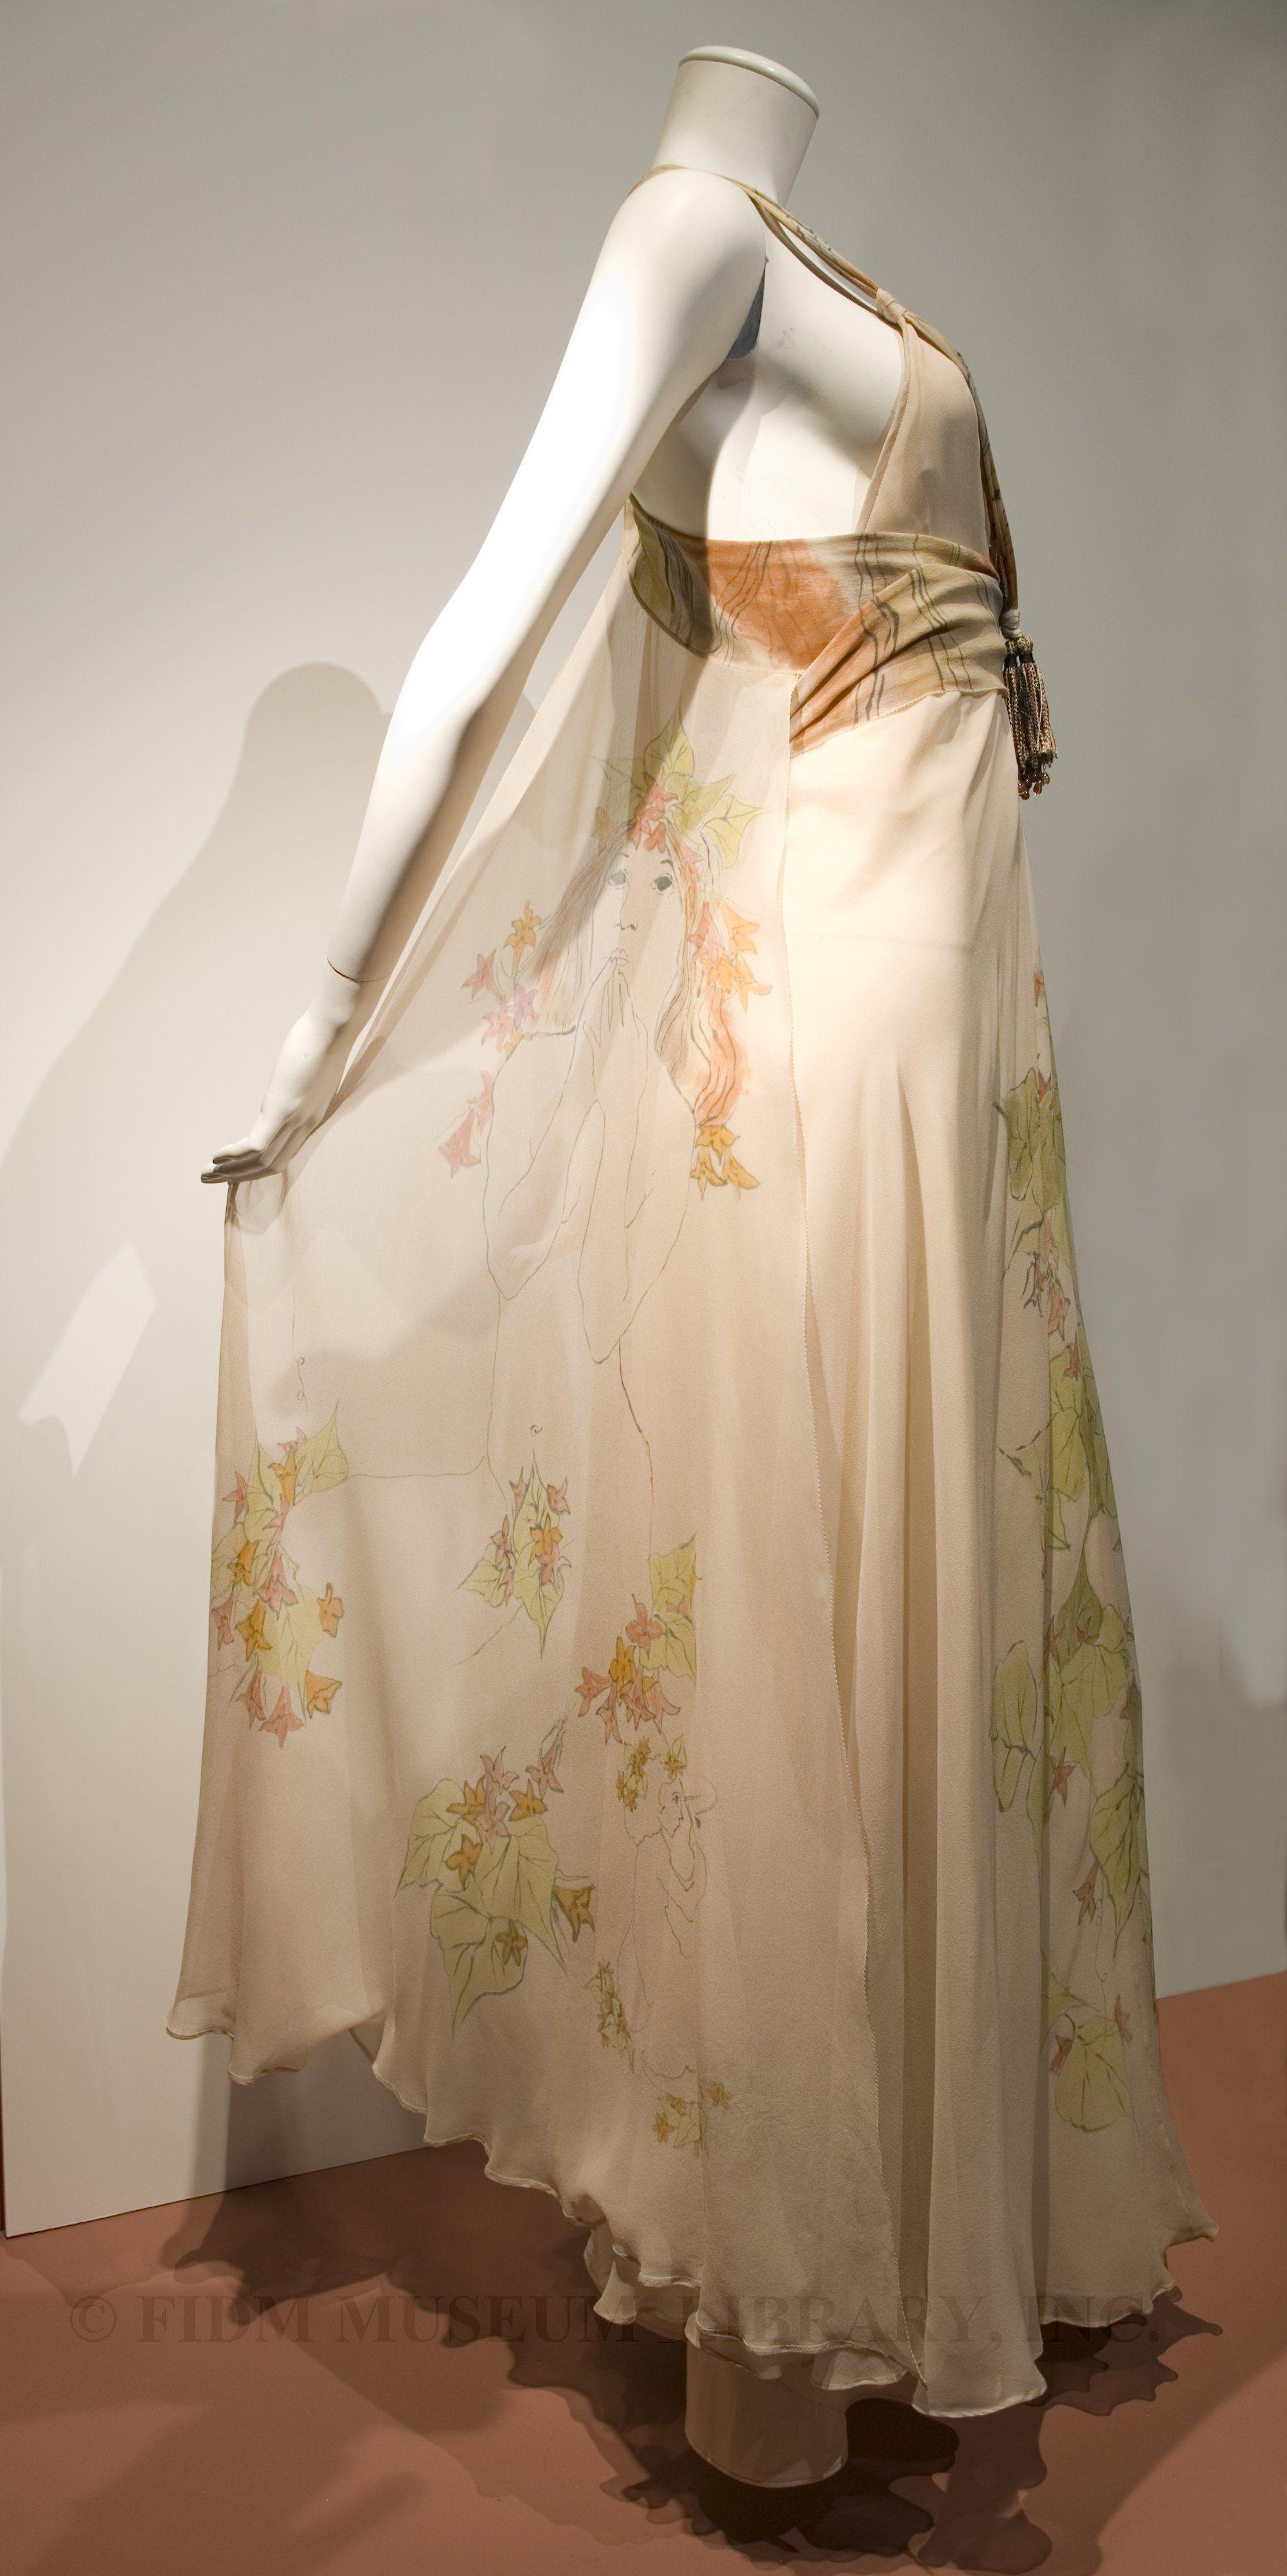 Clothing of a Harp Logo - FIDM Museum Blog: Holly's Harp hand-painted evening gown